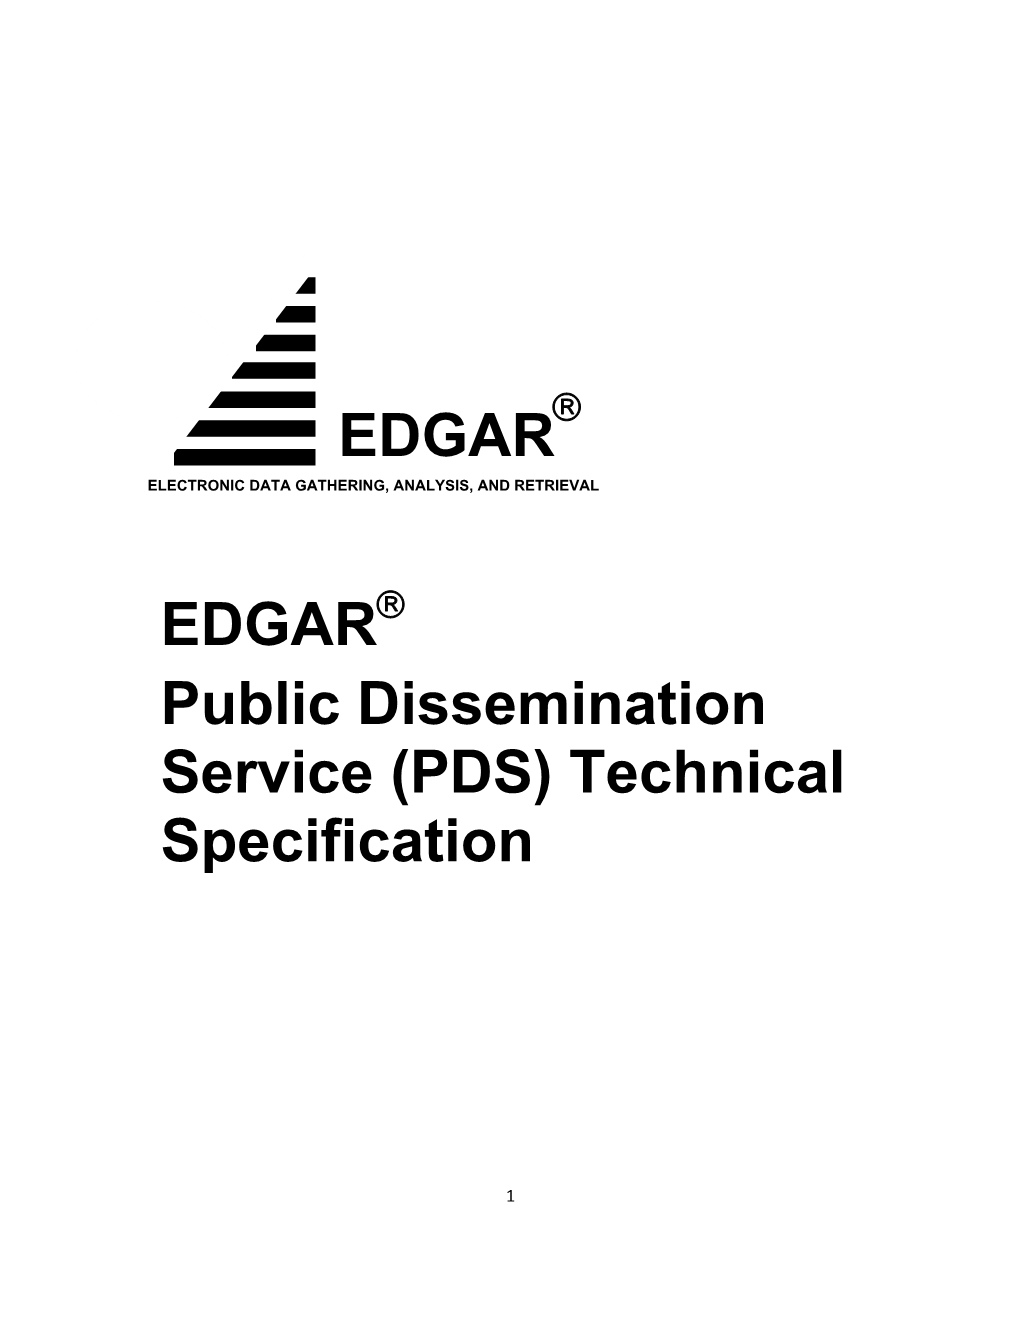 EDGAR Public Dissemination Service (PDS) Technical Specification